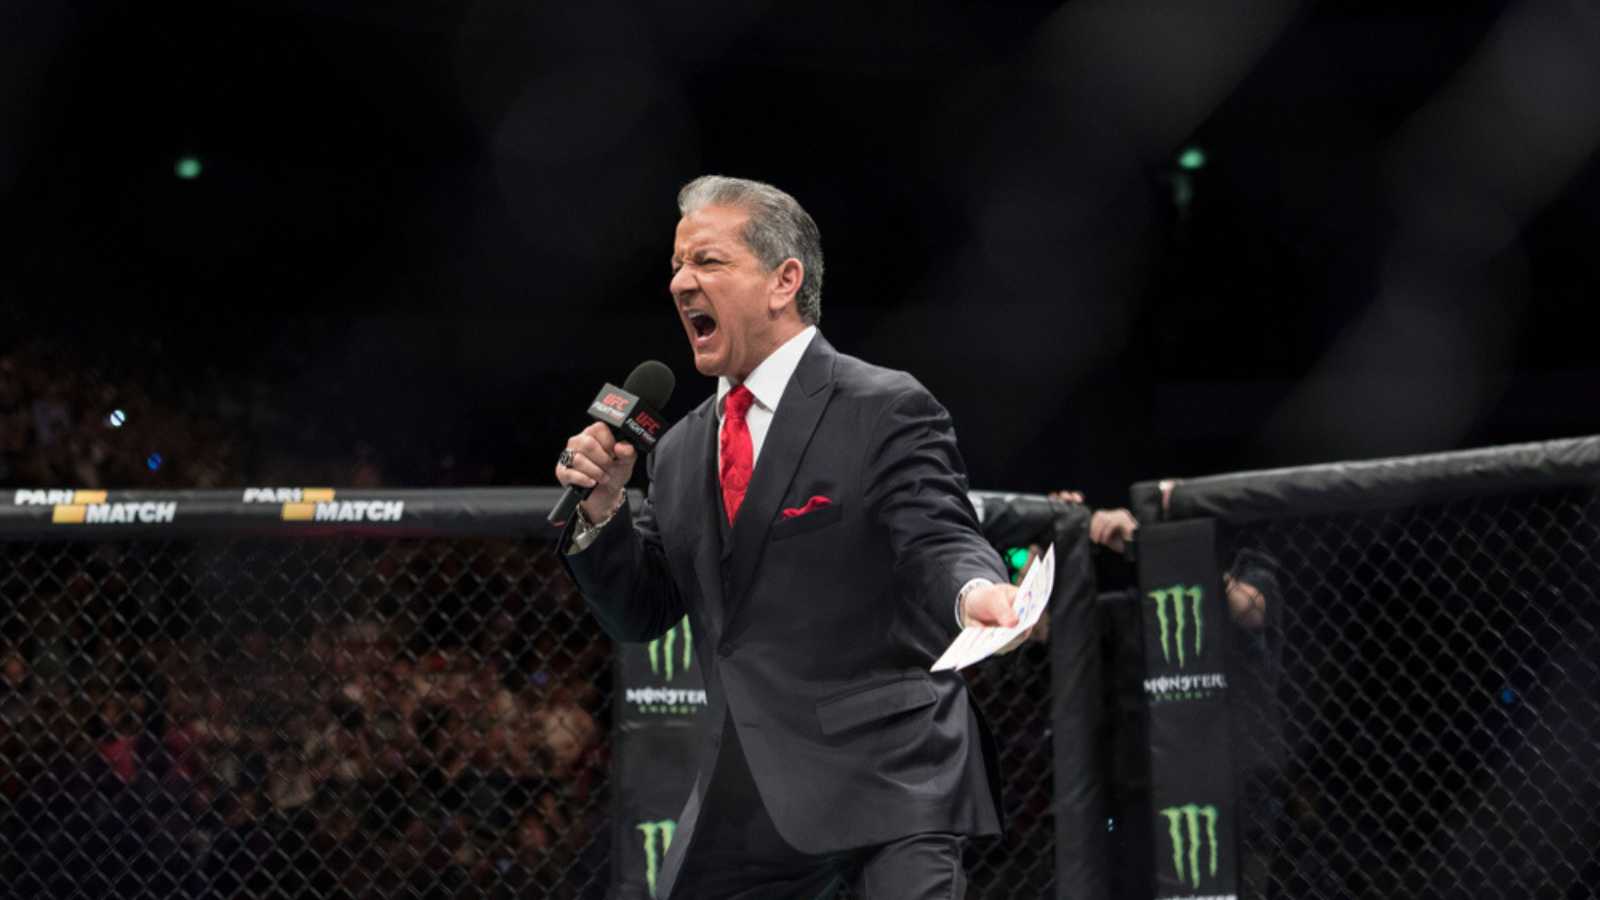 <p>Fight announcers are well paid, specifically Michael Buffer, who works as the announcer for major boxing events, and his brother, Bruce Buffer, a mixed martial arts announcer. Both earn millions a year for saying a few lines into a mic. It's a niche position that is hugely profitable for the Buffer brothers.</p>